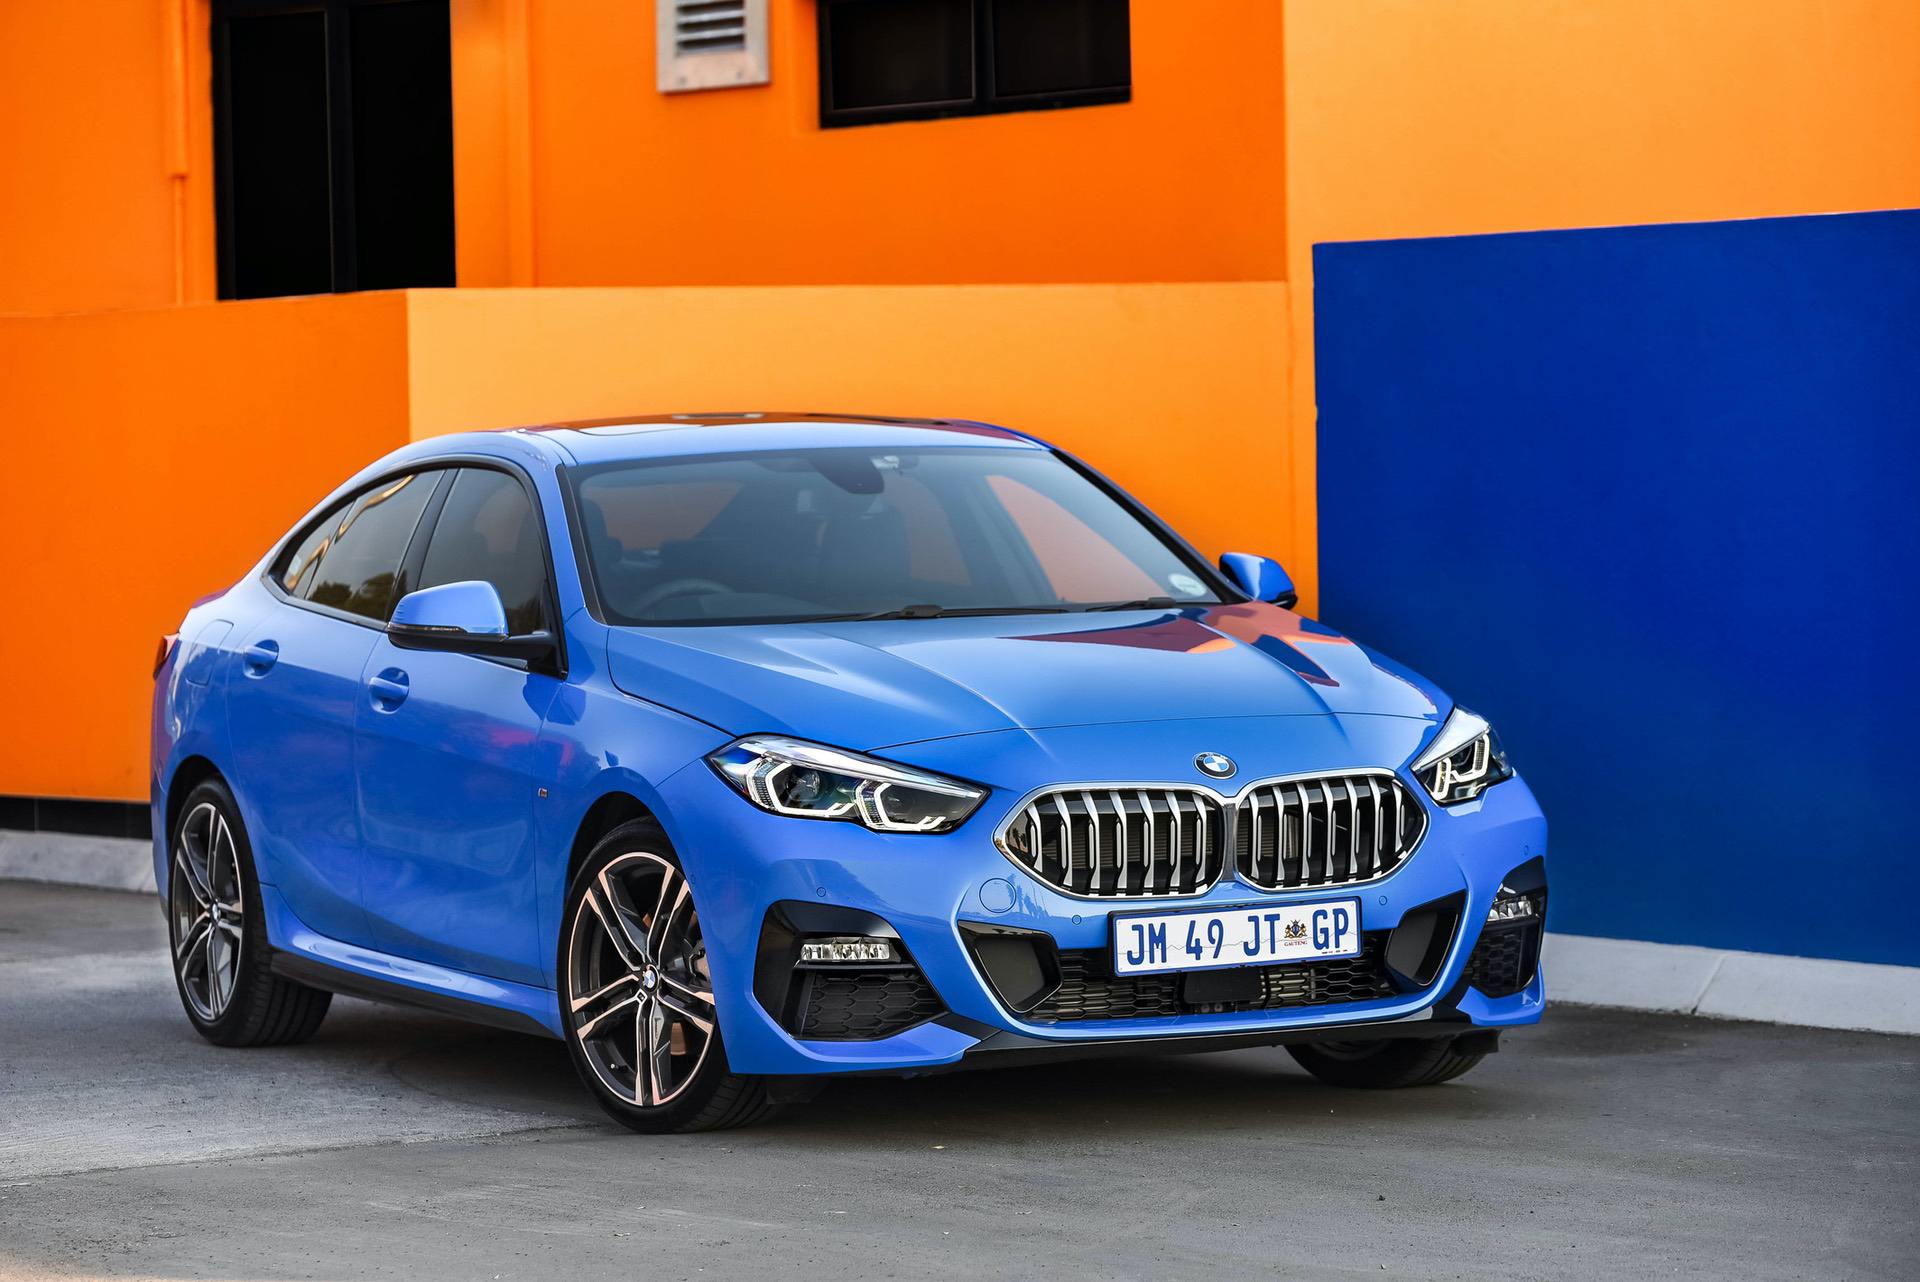 The new BMW 2 Series Gran Coupe launches in South Africa